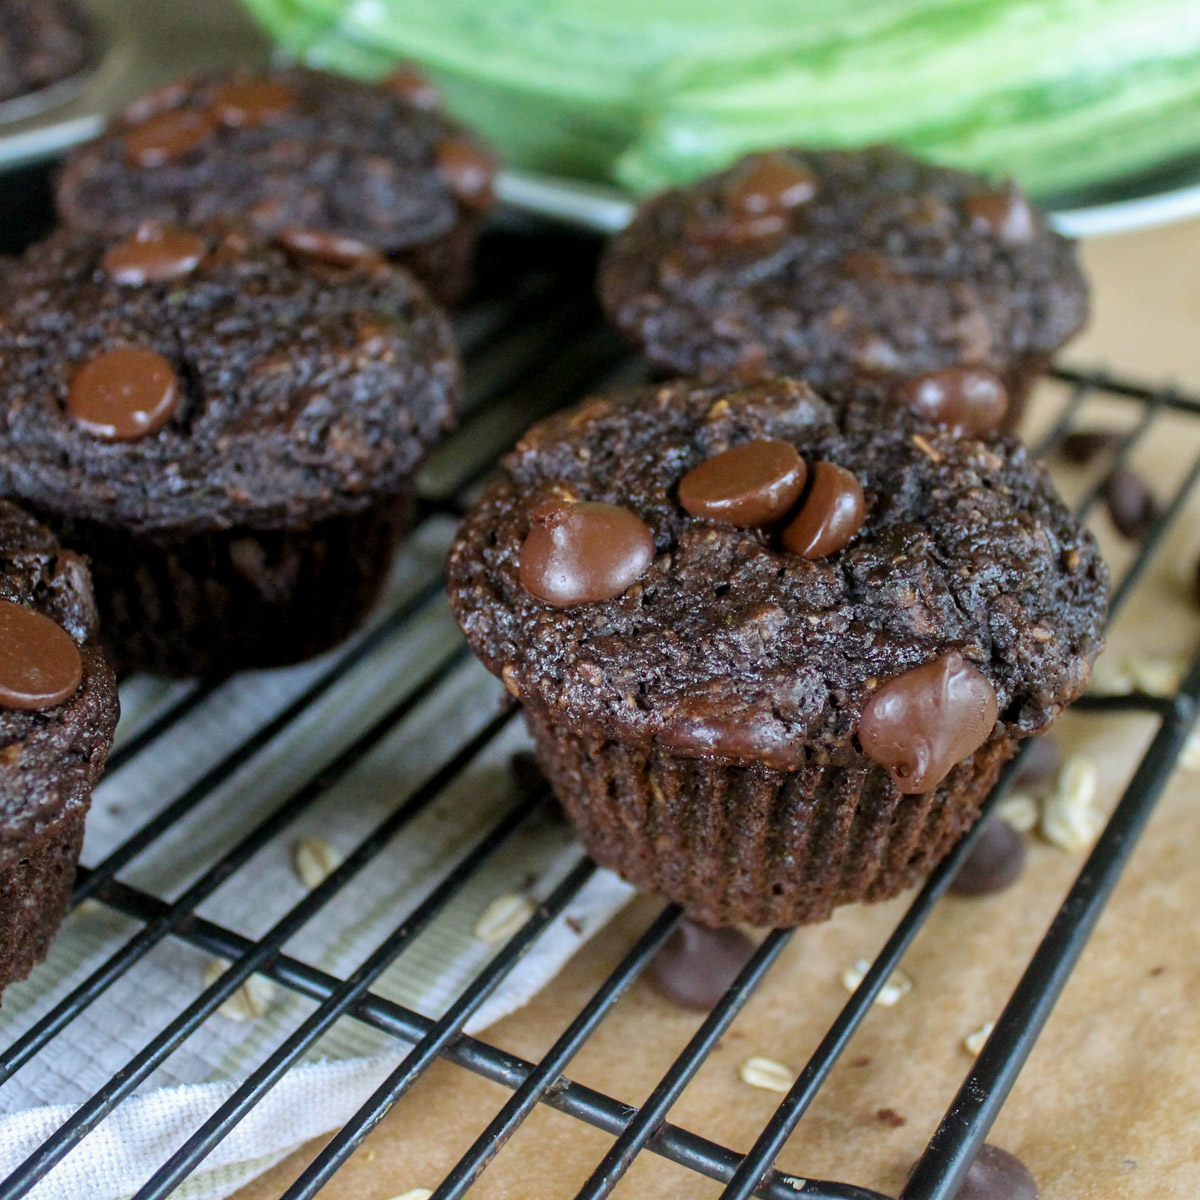 Chocolate zucchini oatmeal muffins in front of a bowl of green zucchinis.